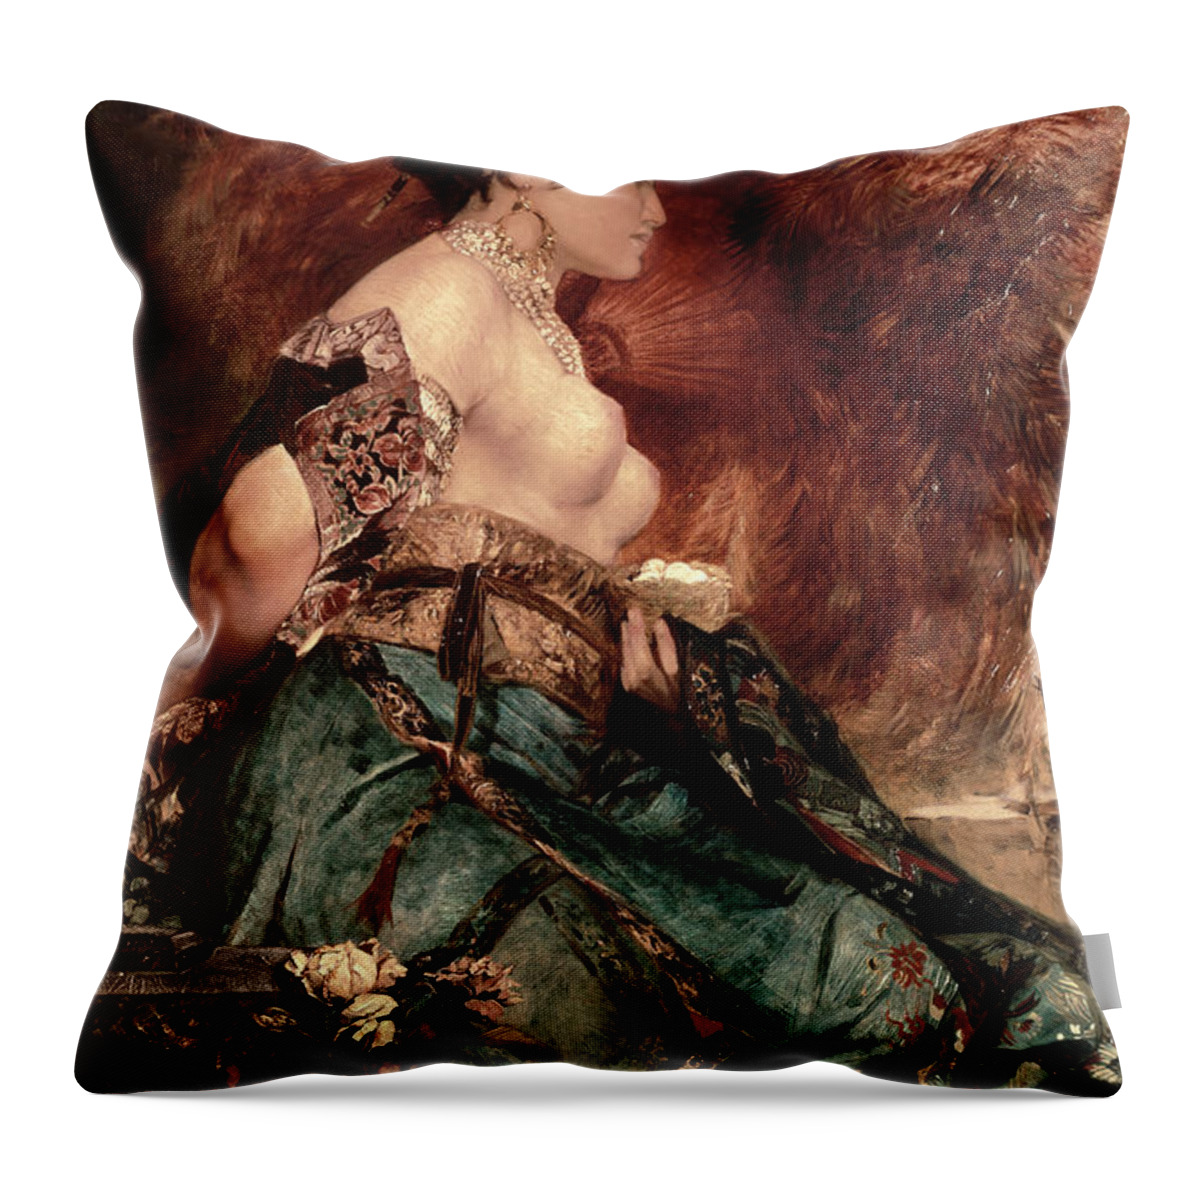 Japanese Throw Pillow featuring the painting Japanese girl by Hans Makart